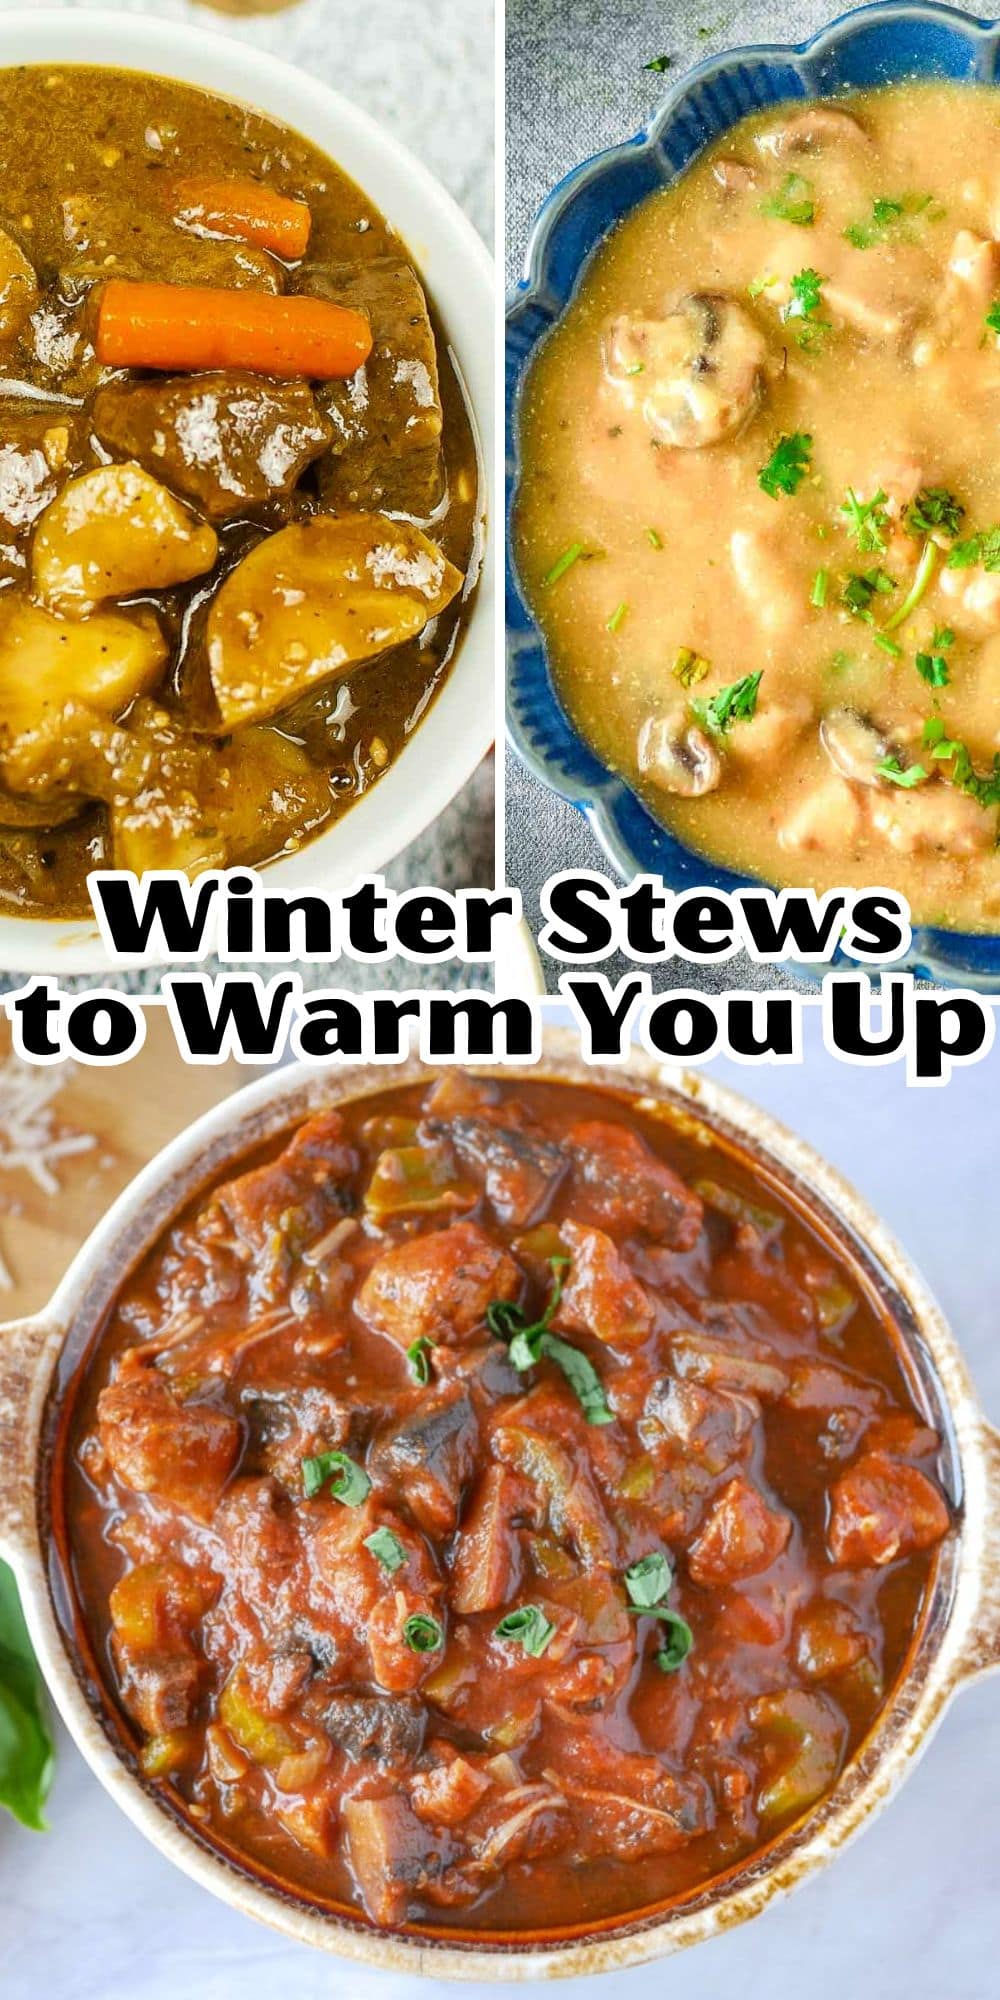 Winter stews to warm you up.